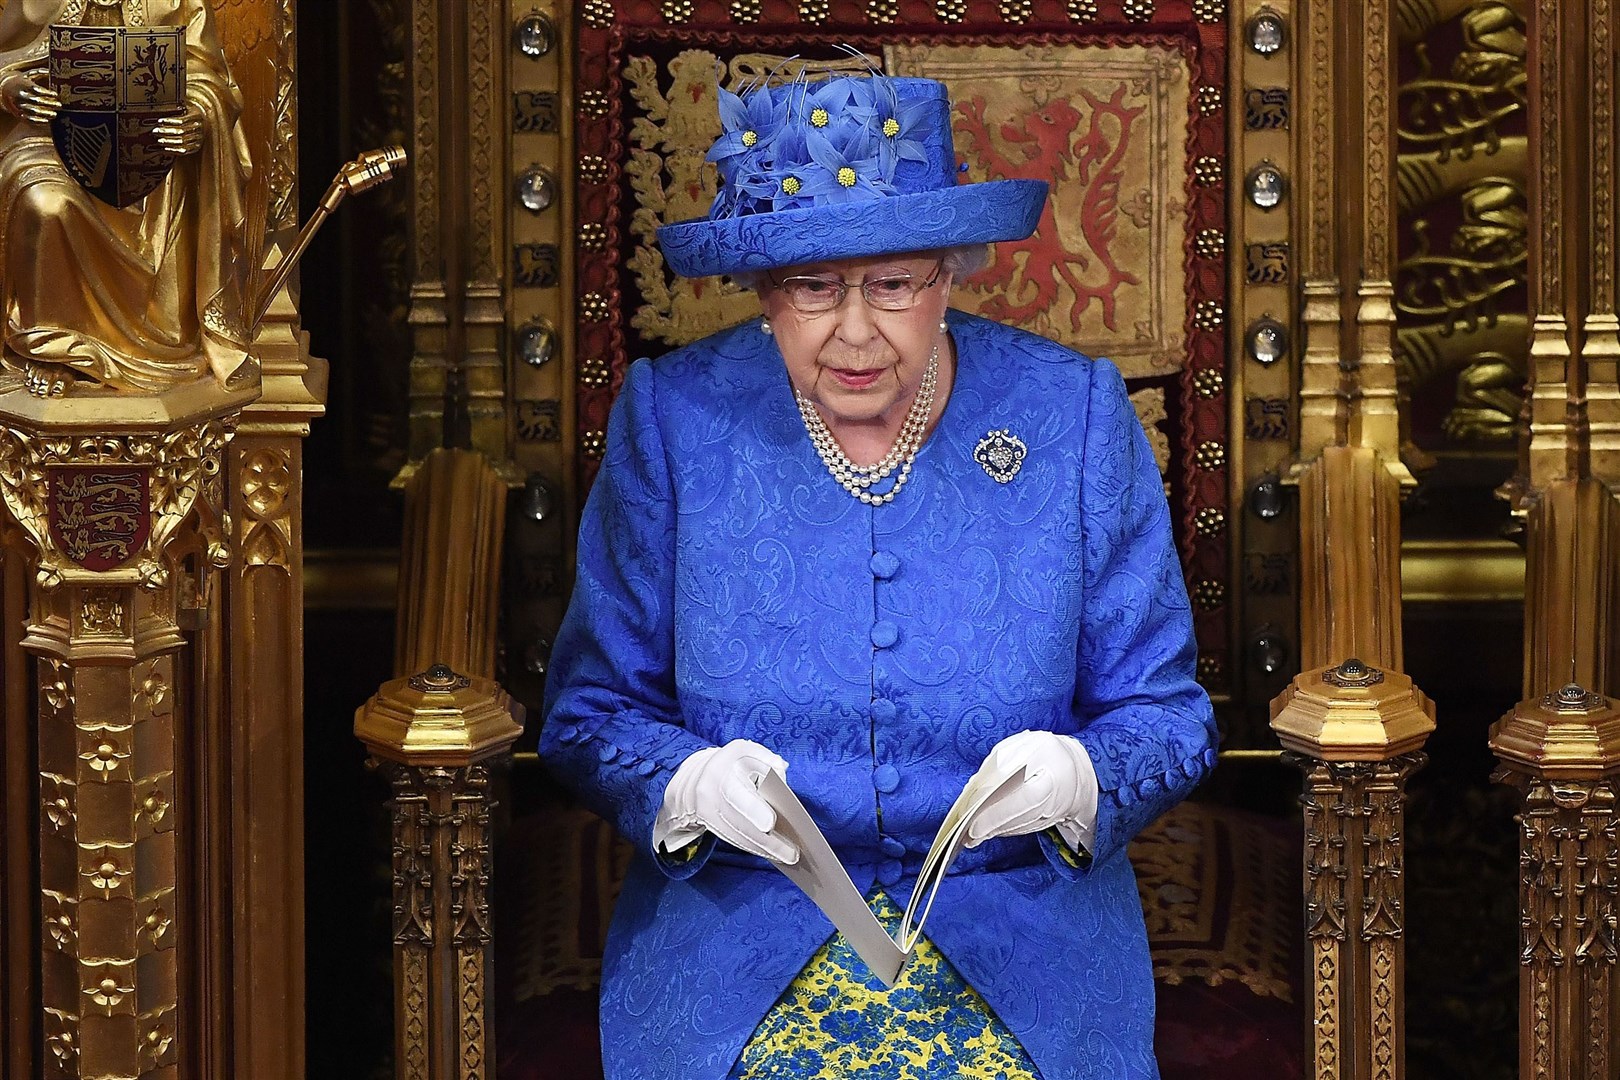 The Queen reading her speech at the state opening of parliament in 2017 (Carl Court/PA)